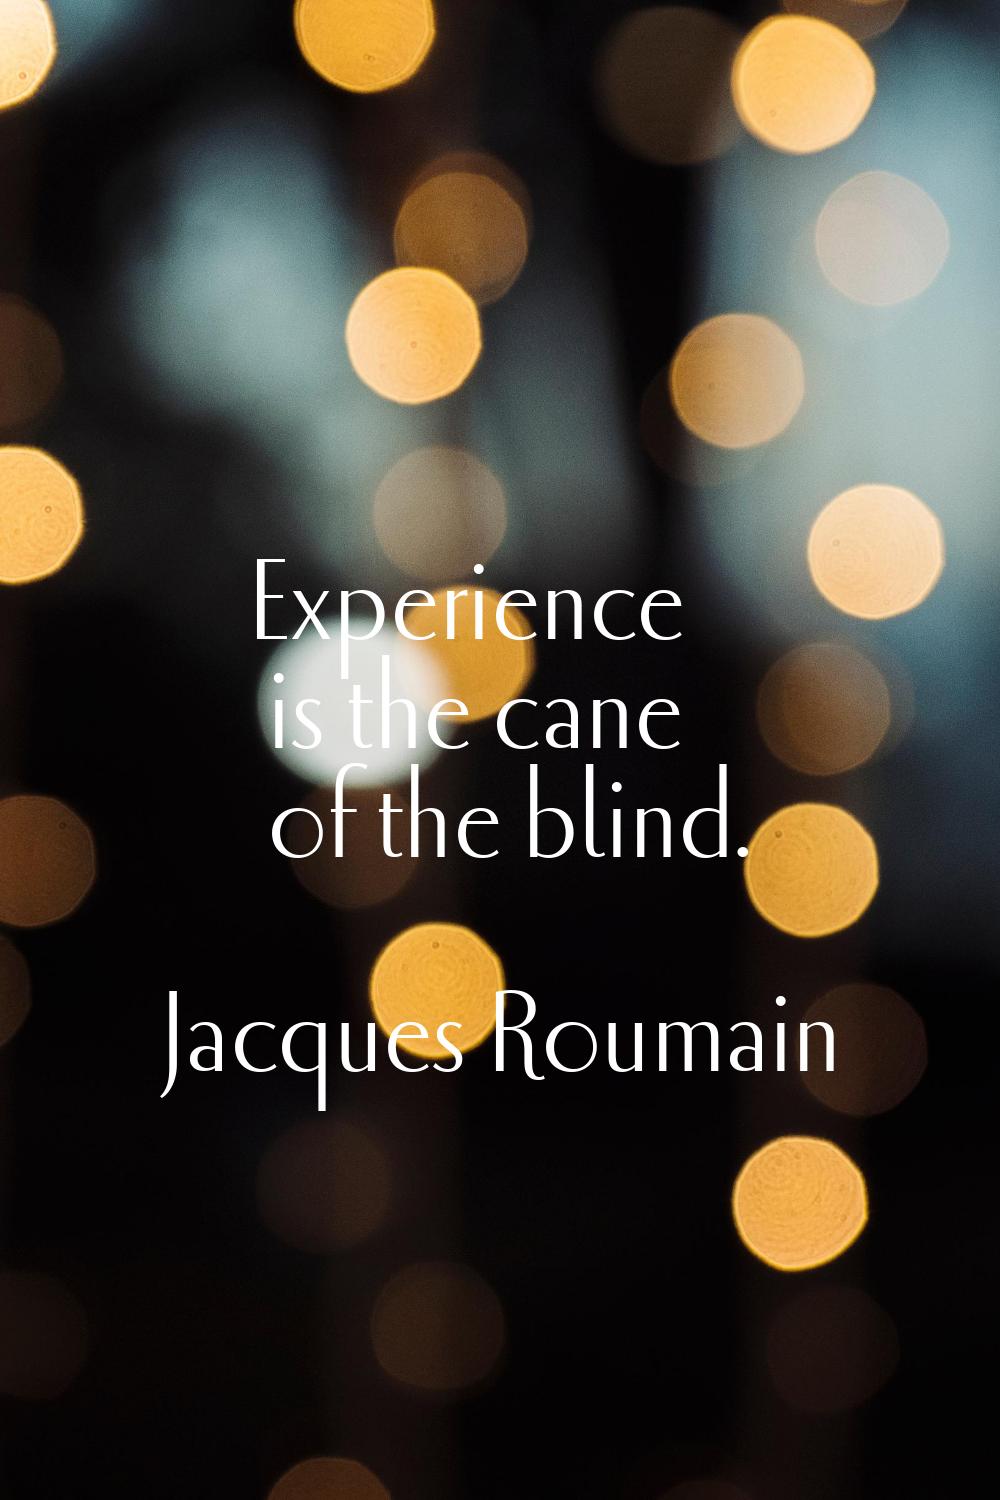 Experience is the cane of the blind.